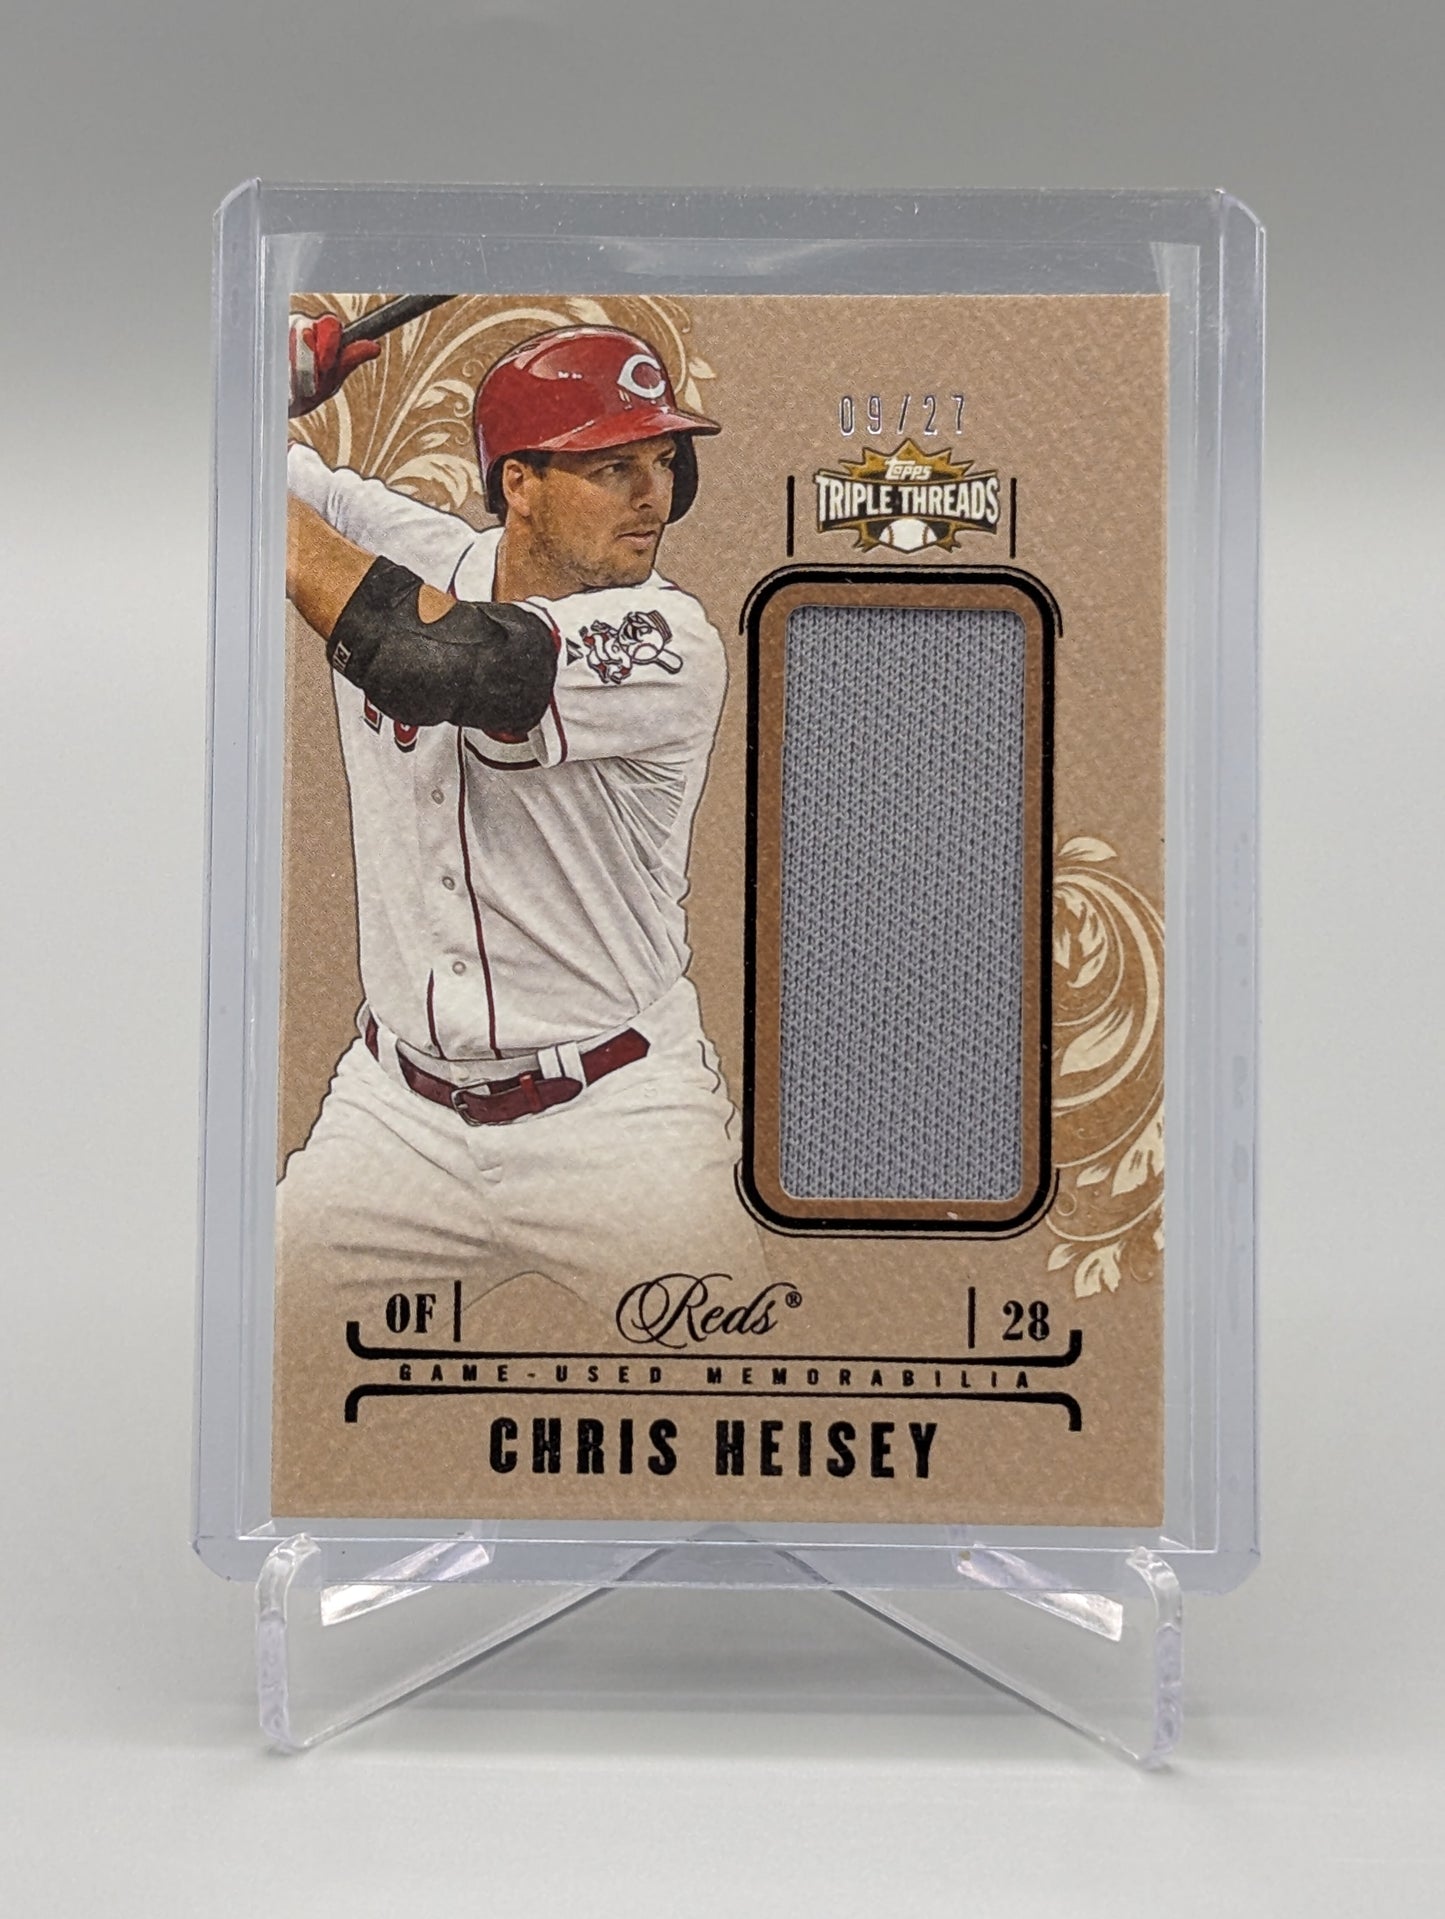 2014 Topps Triple Threads Unity Relic #UJR-CH Chris Heisey #/27 Reds